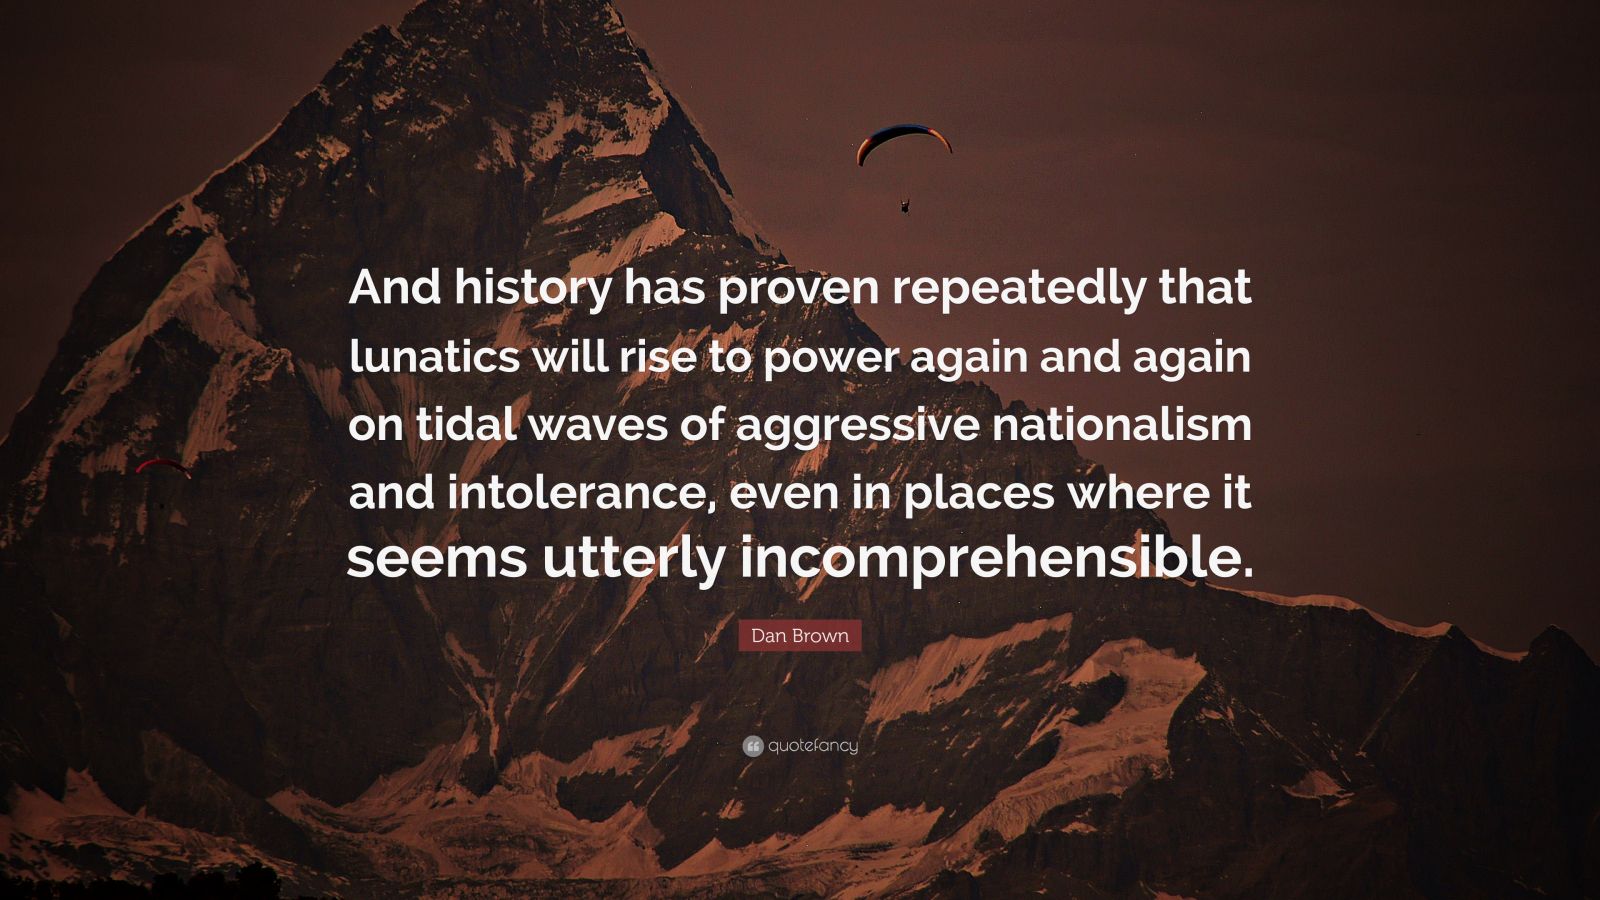 Dan Brown Quote: “And history has proven repeatedly that lunatics will ...